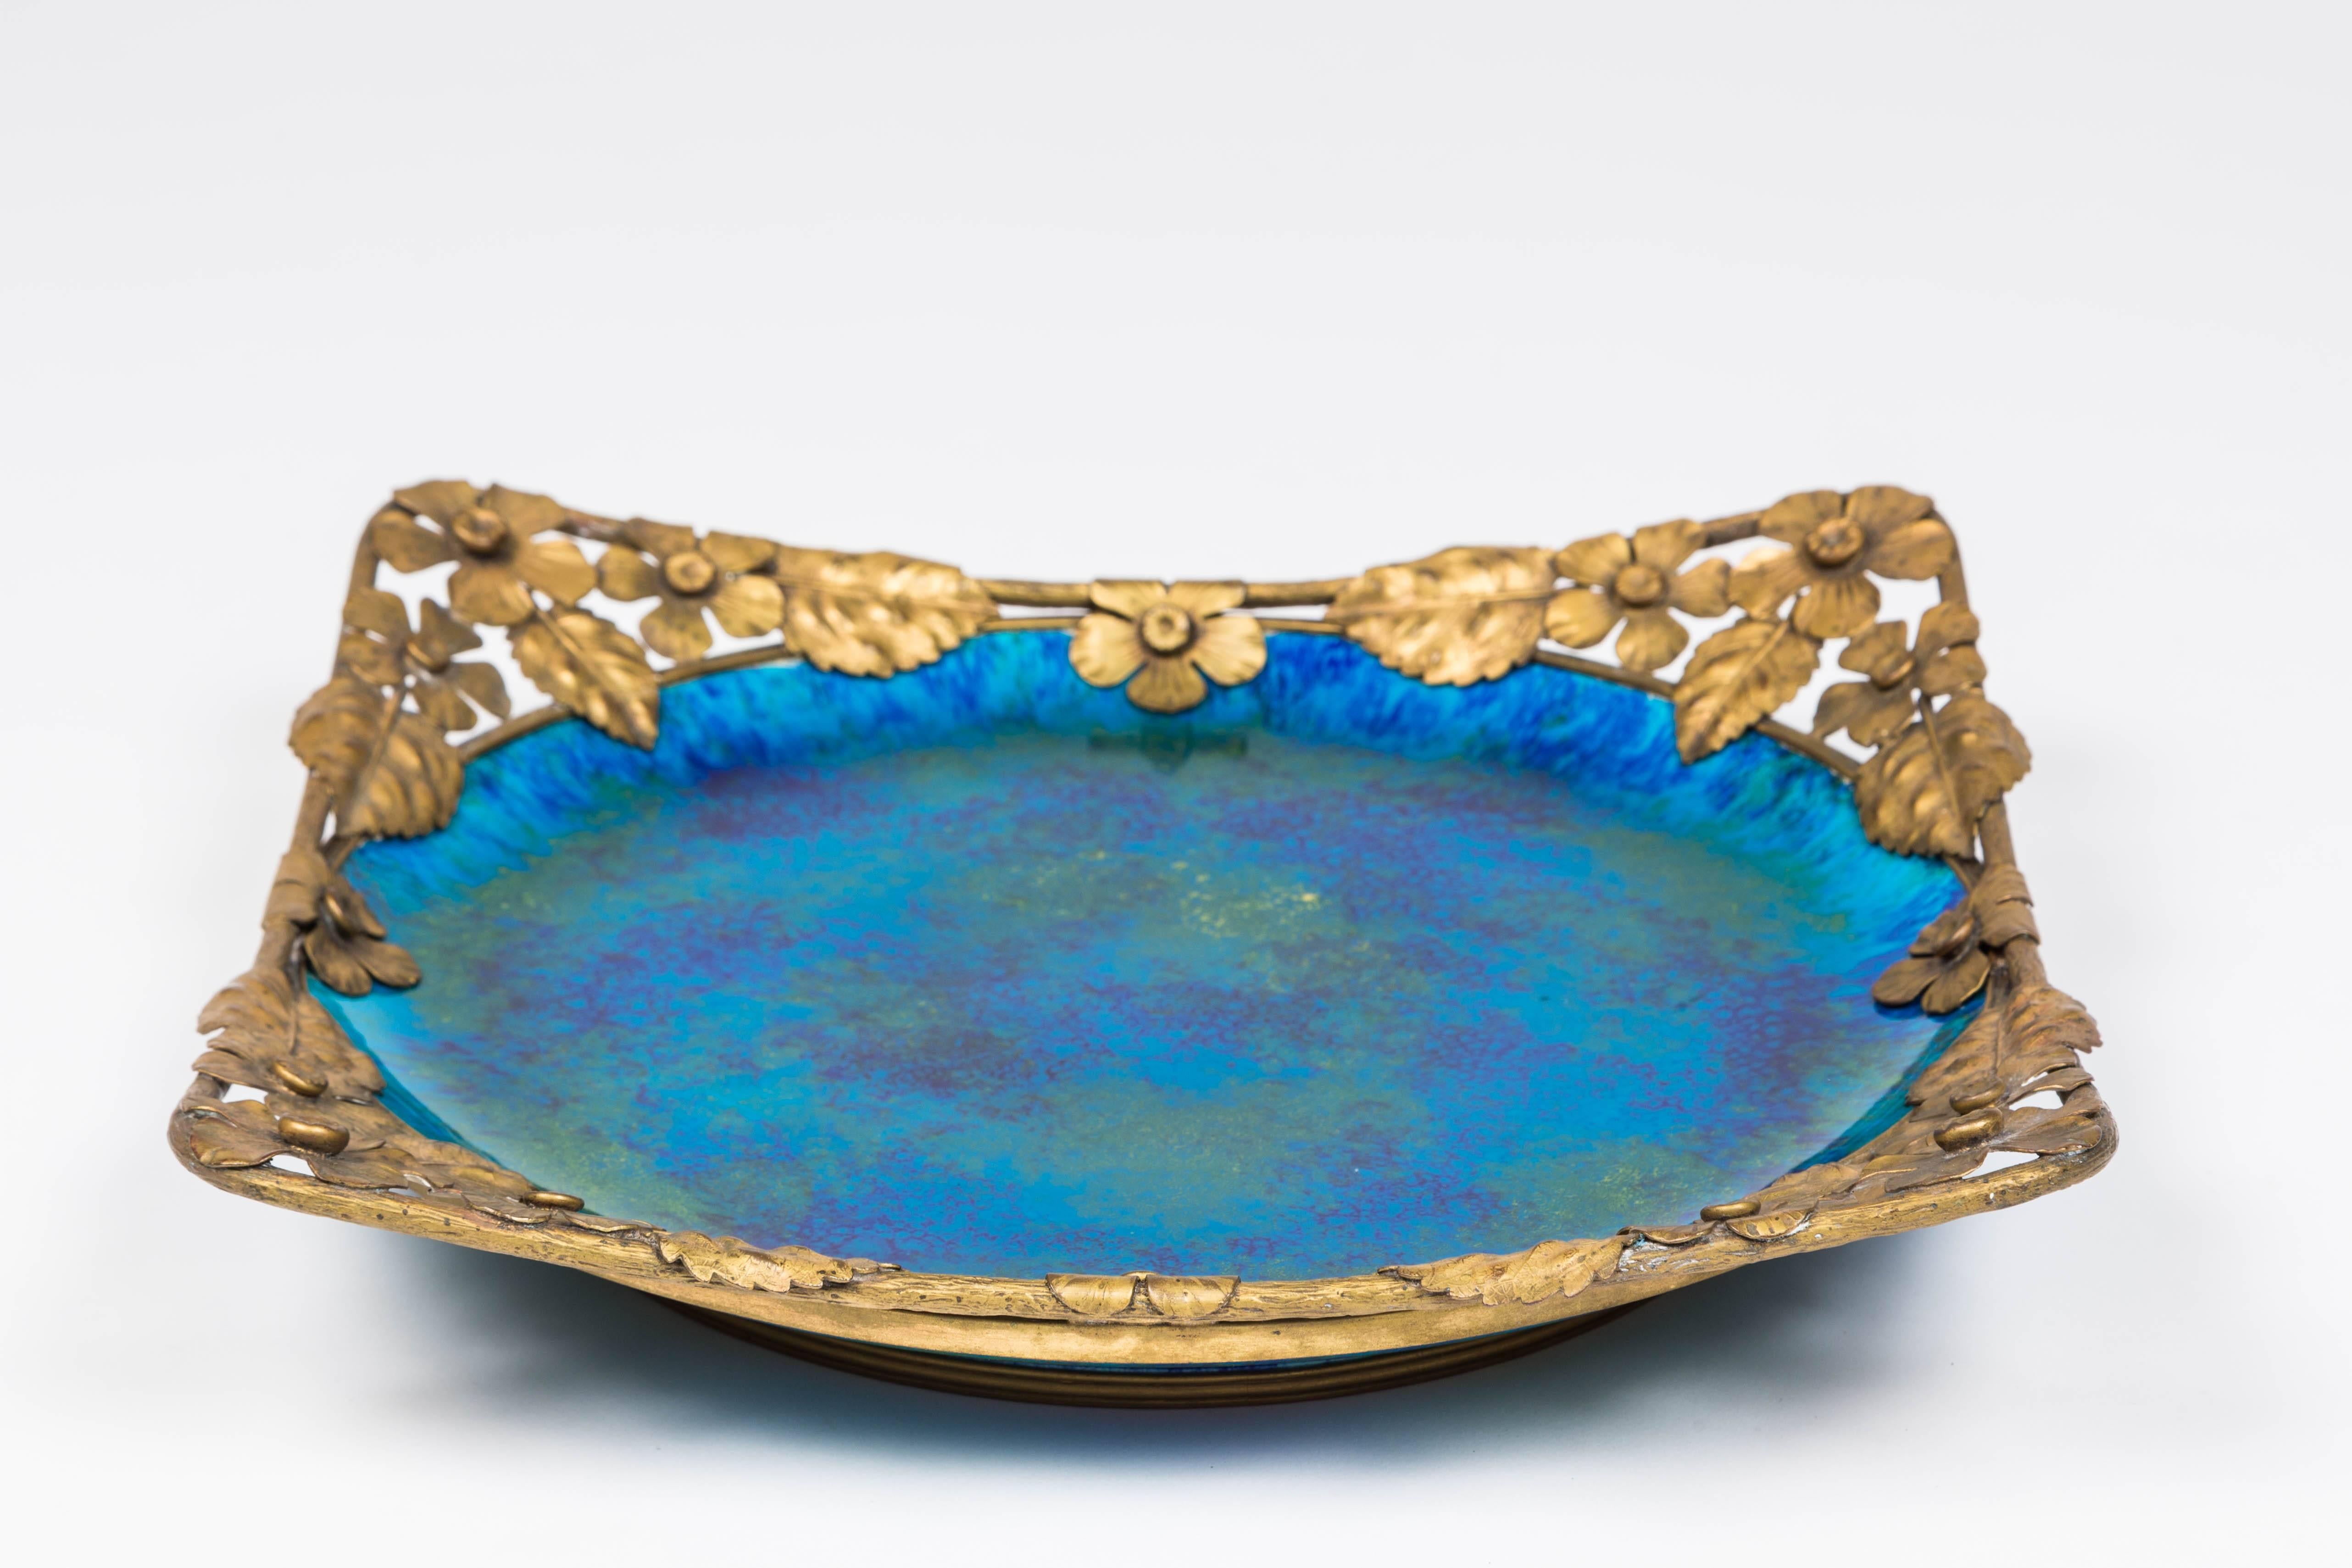 Art Deco  Platter with Gilt Metal Surround by Paul Millet for Sevres